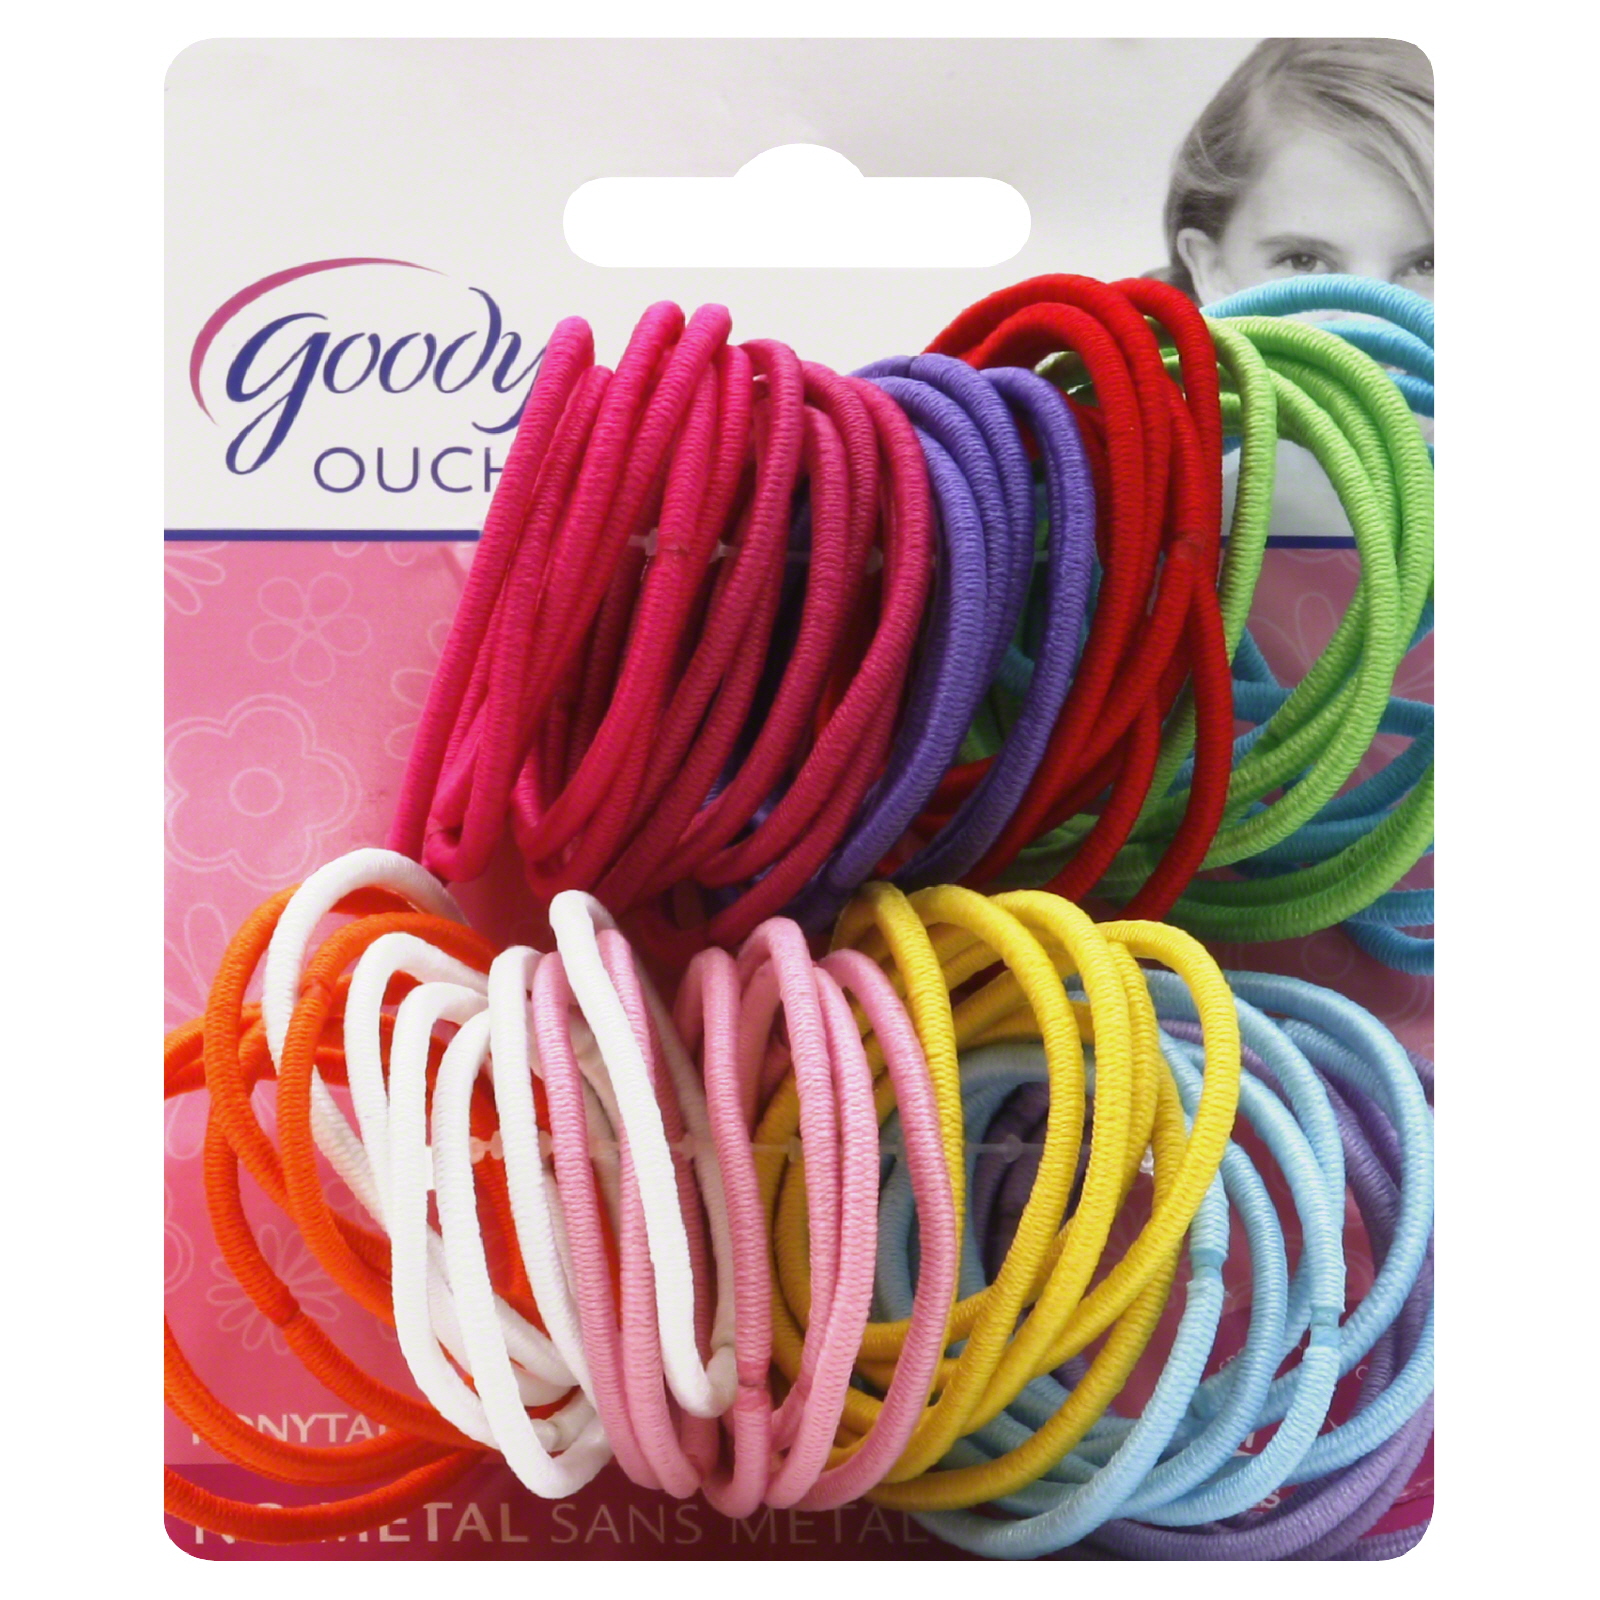 Goody Girls Ouchless 2MM Elastics, 72 CT